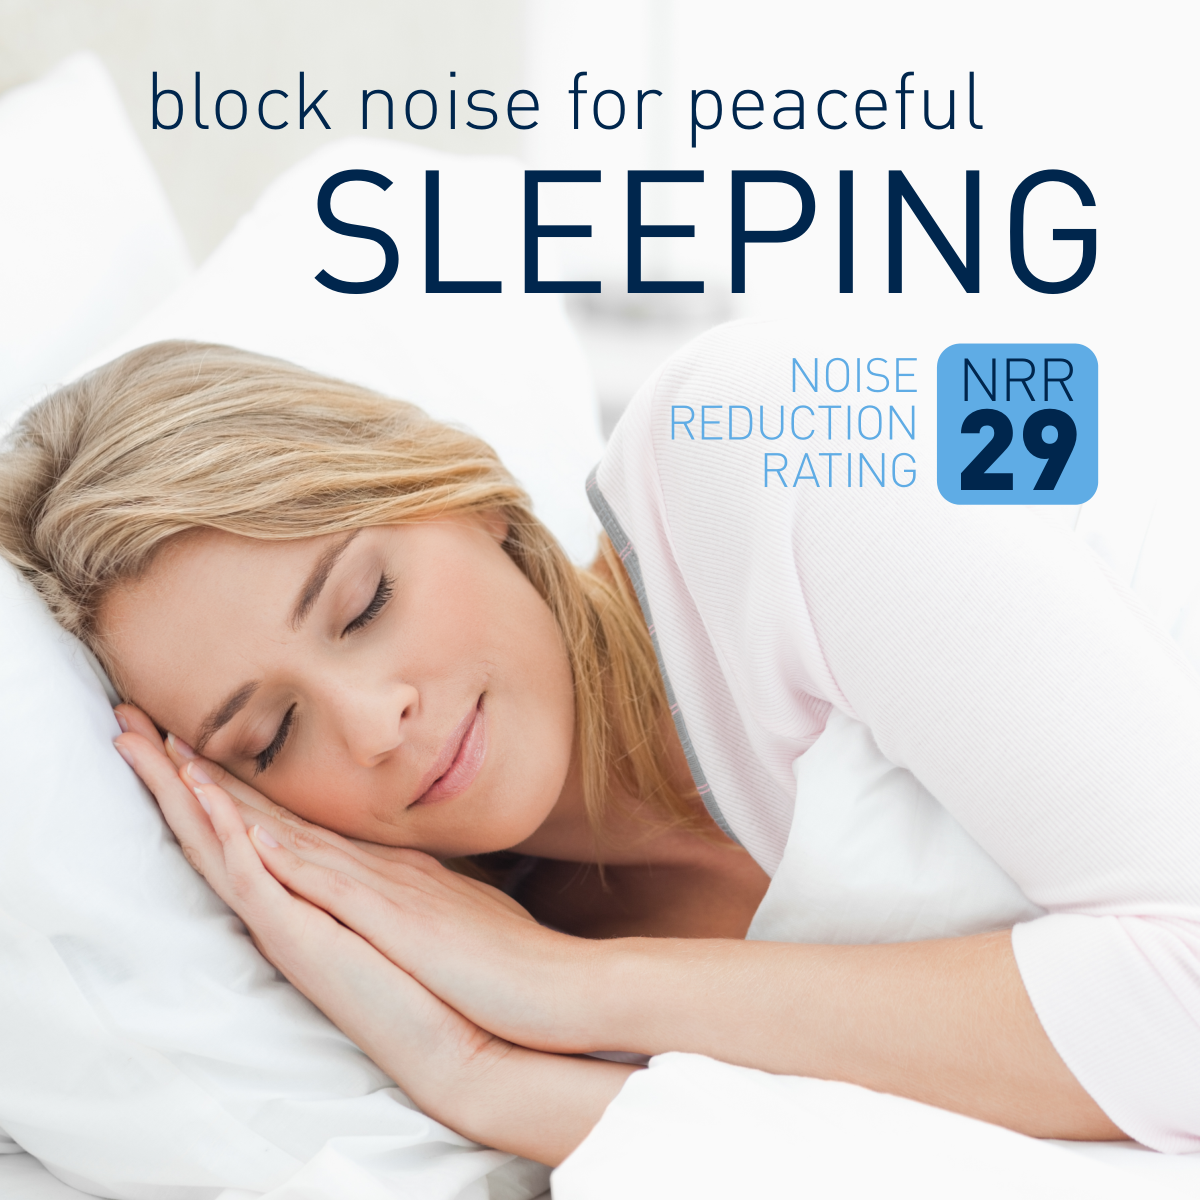 Use Flents Quiet Please ear plugs to block noise for peaceful sleeping